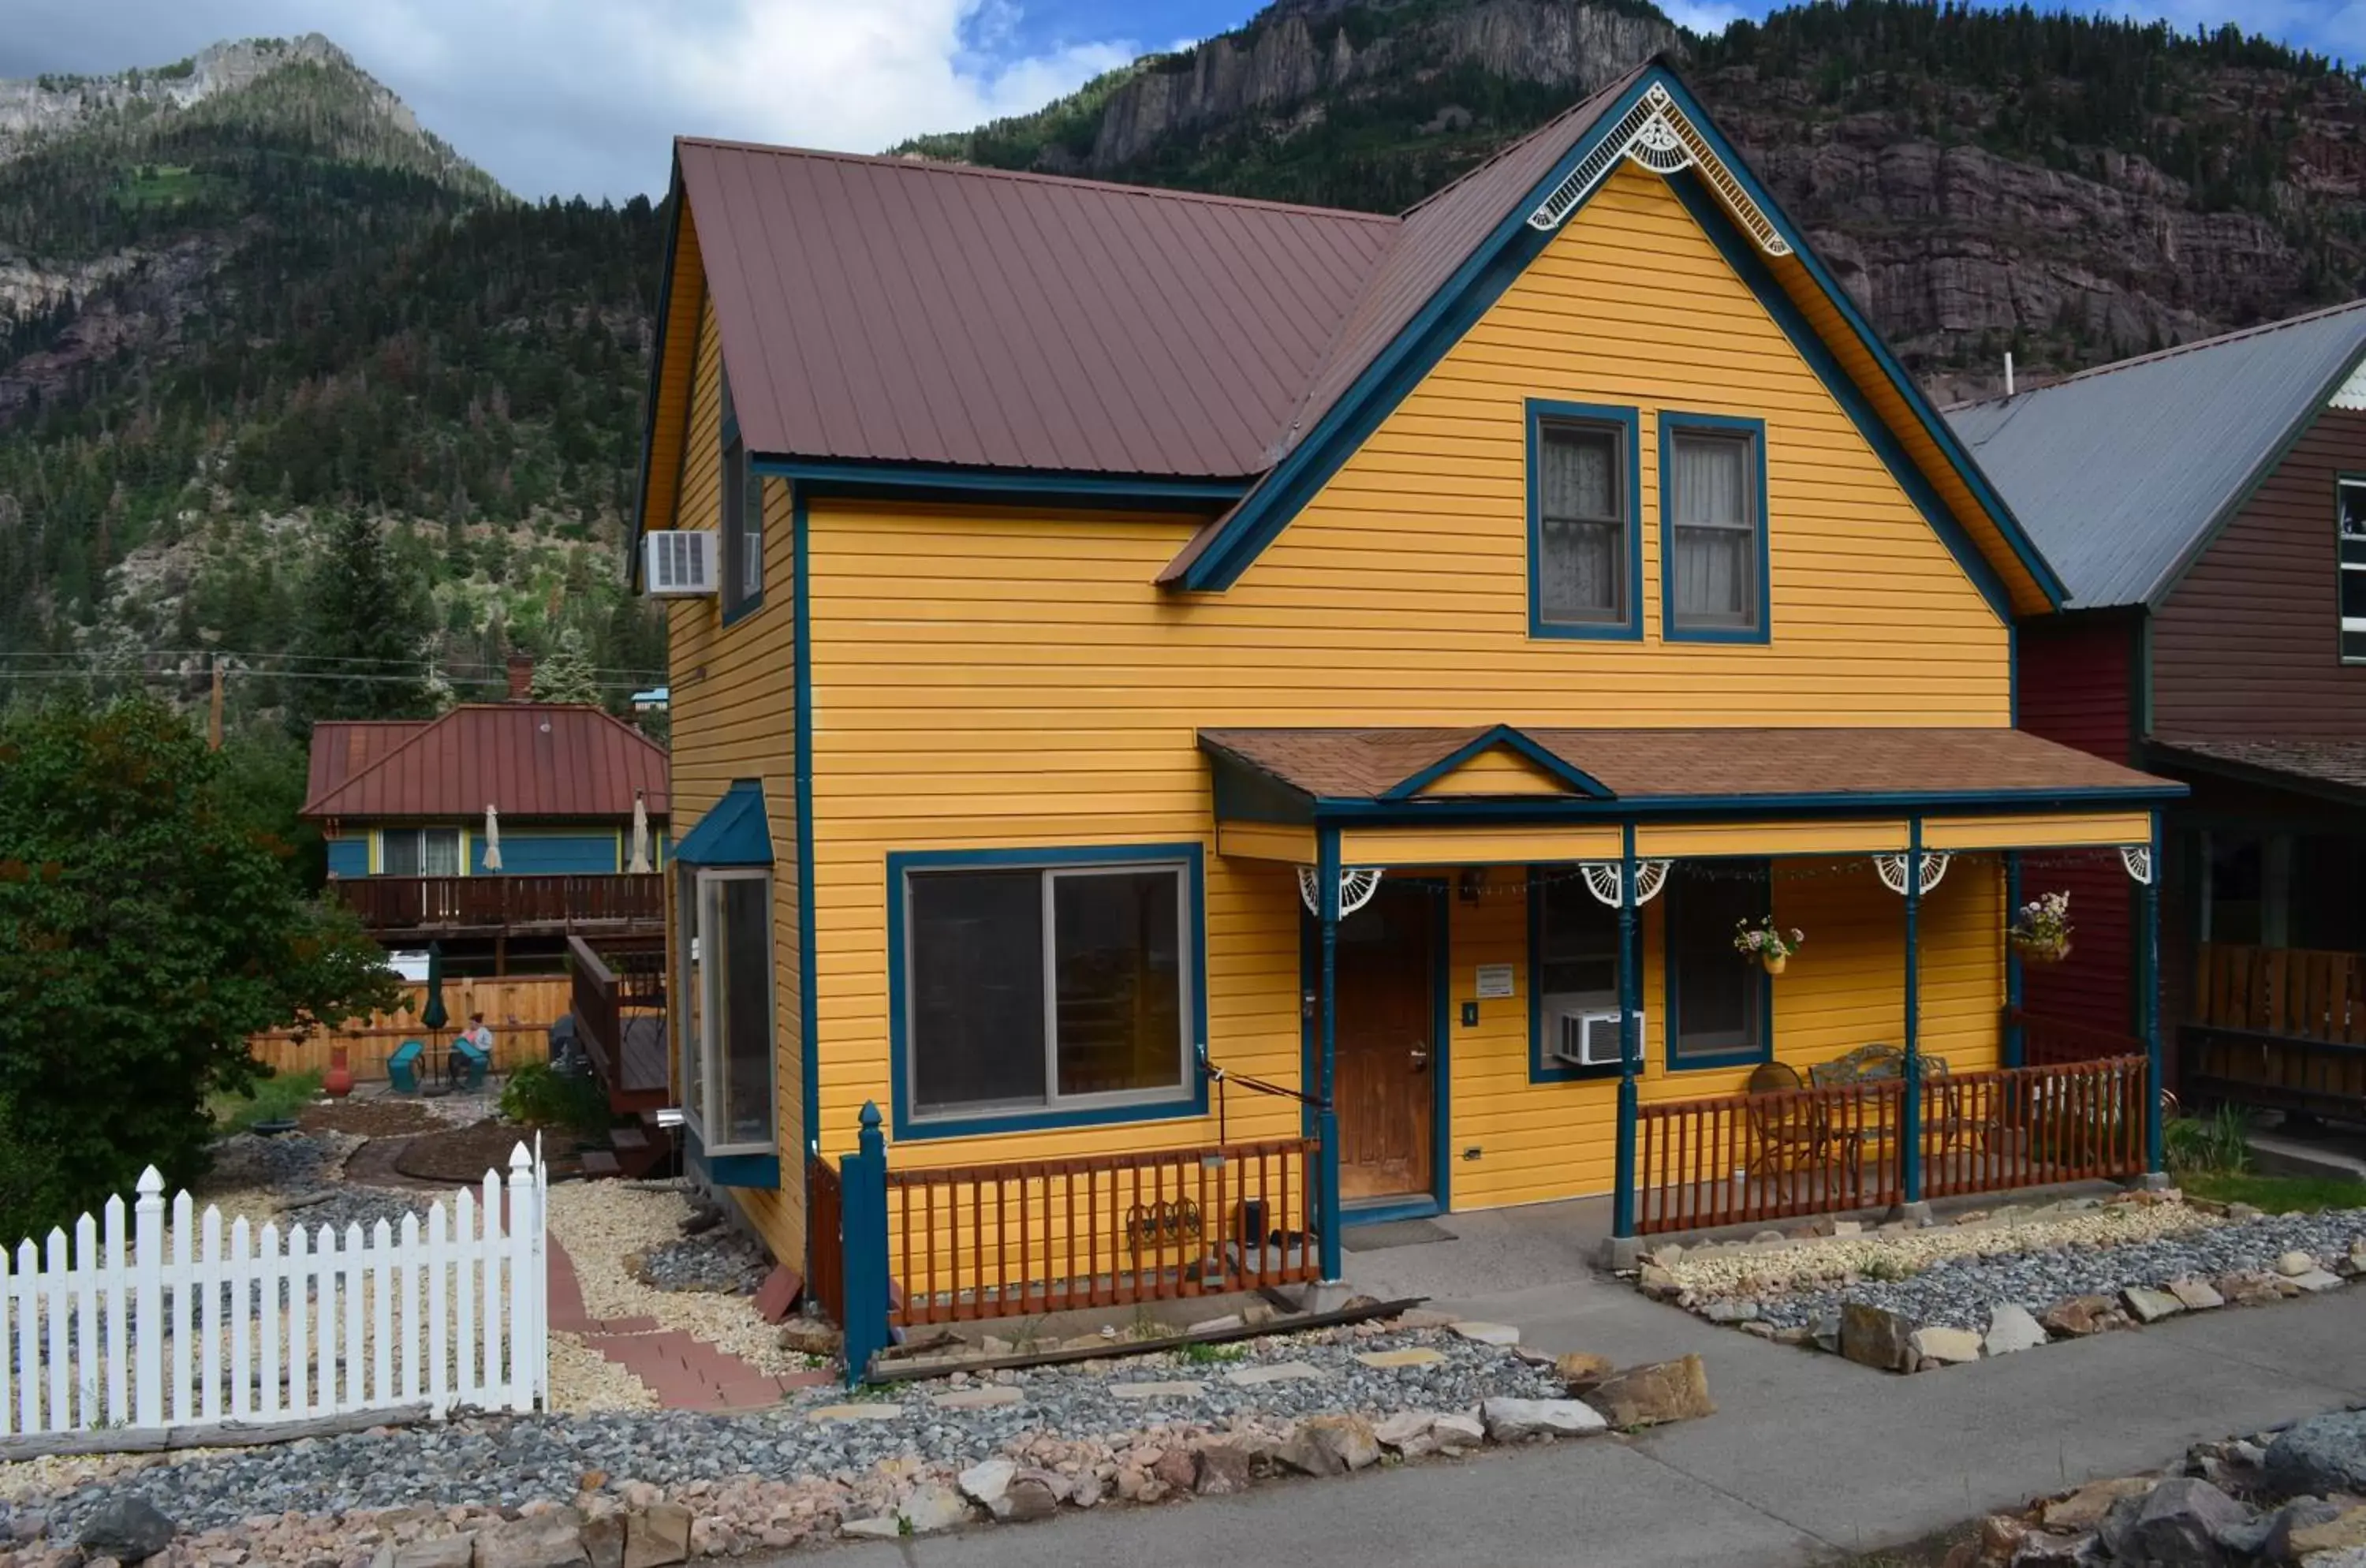 Property Building in The Ouray Main Street Inn